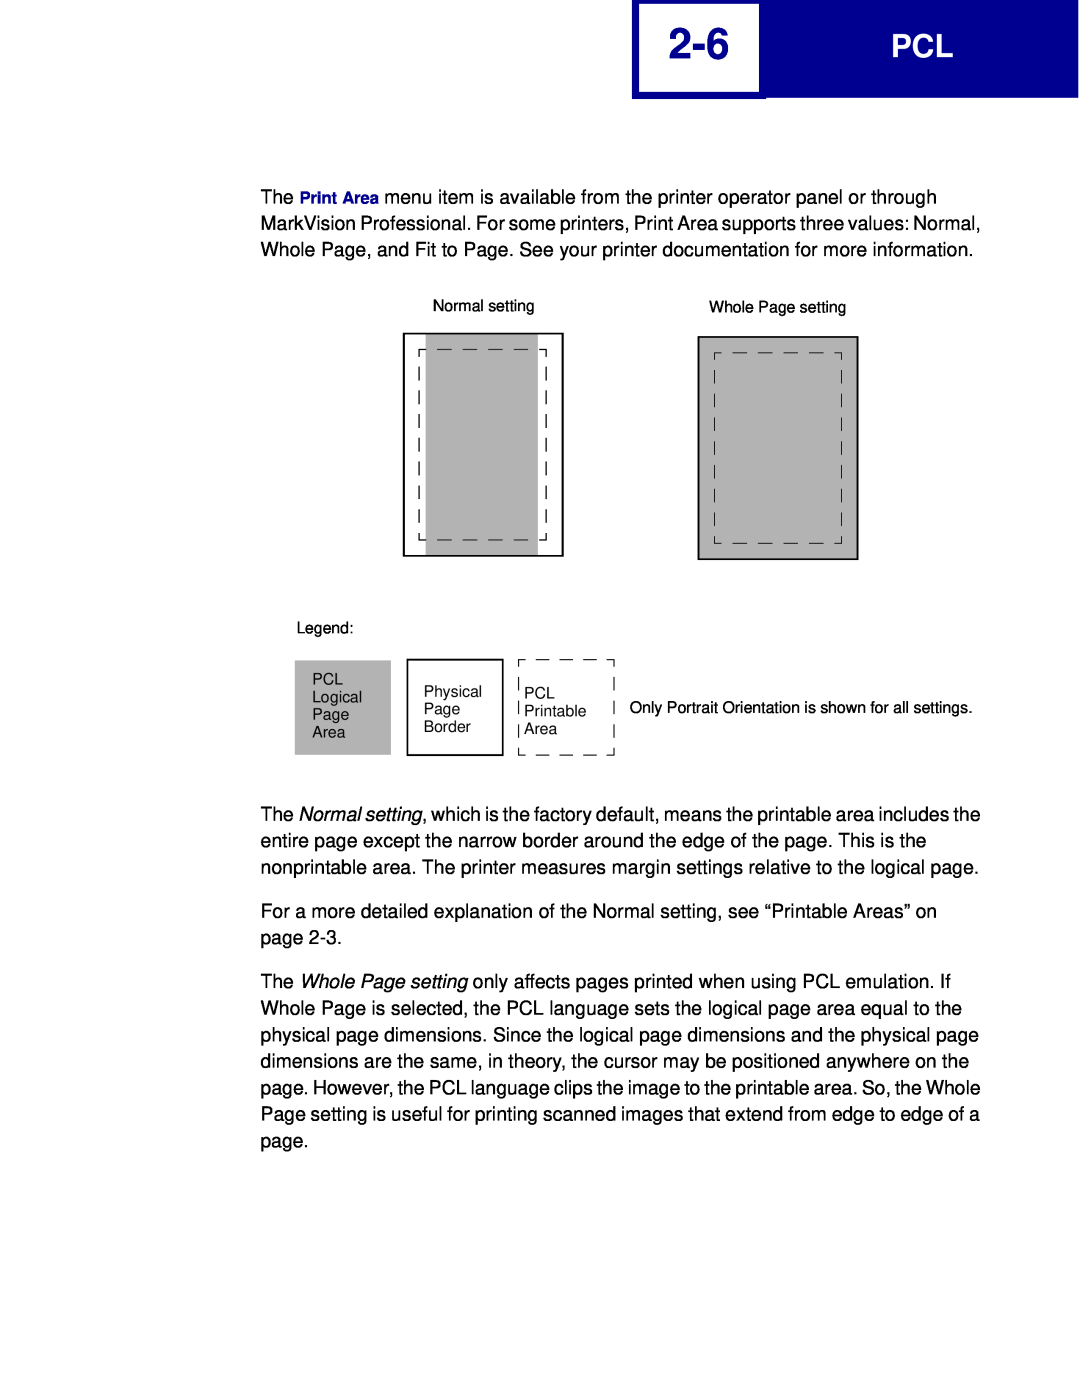 Lexmark C760, C762 Normal setting, Whole Page setting, PCL Logical Page Area, Physical Page Border, PCL Printable Area 